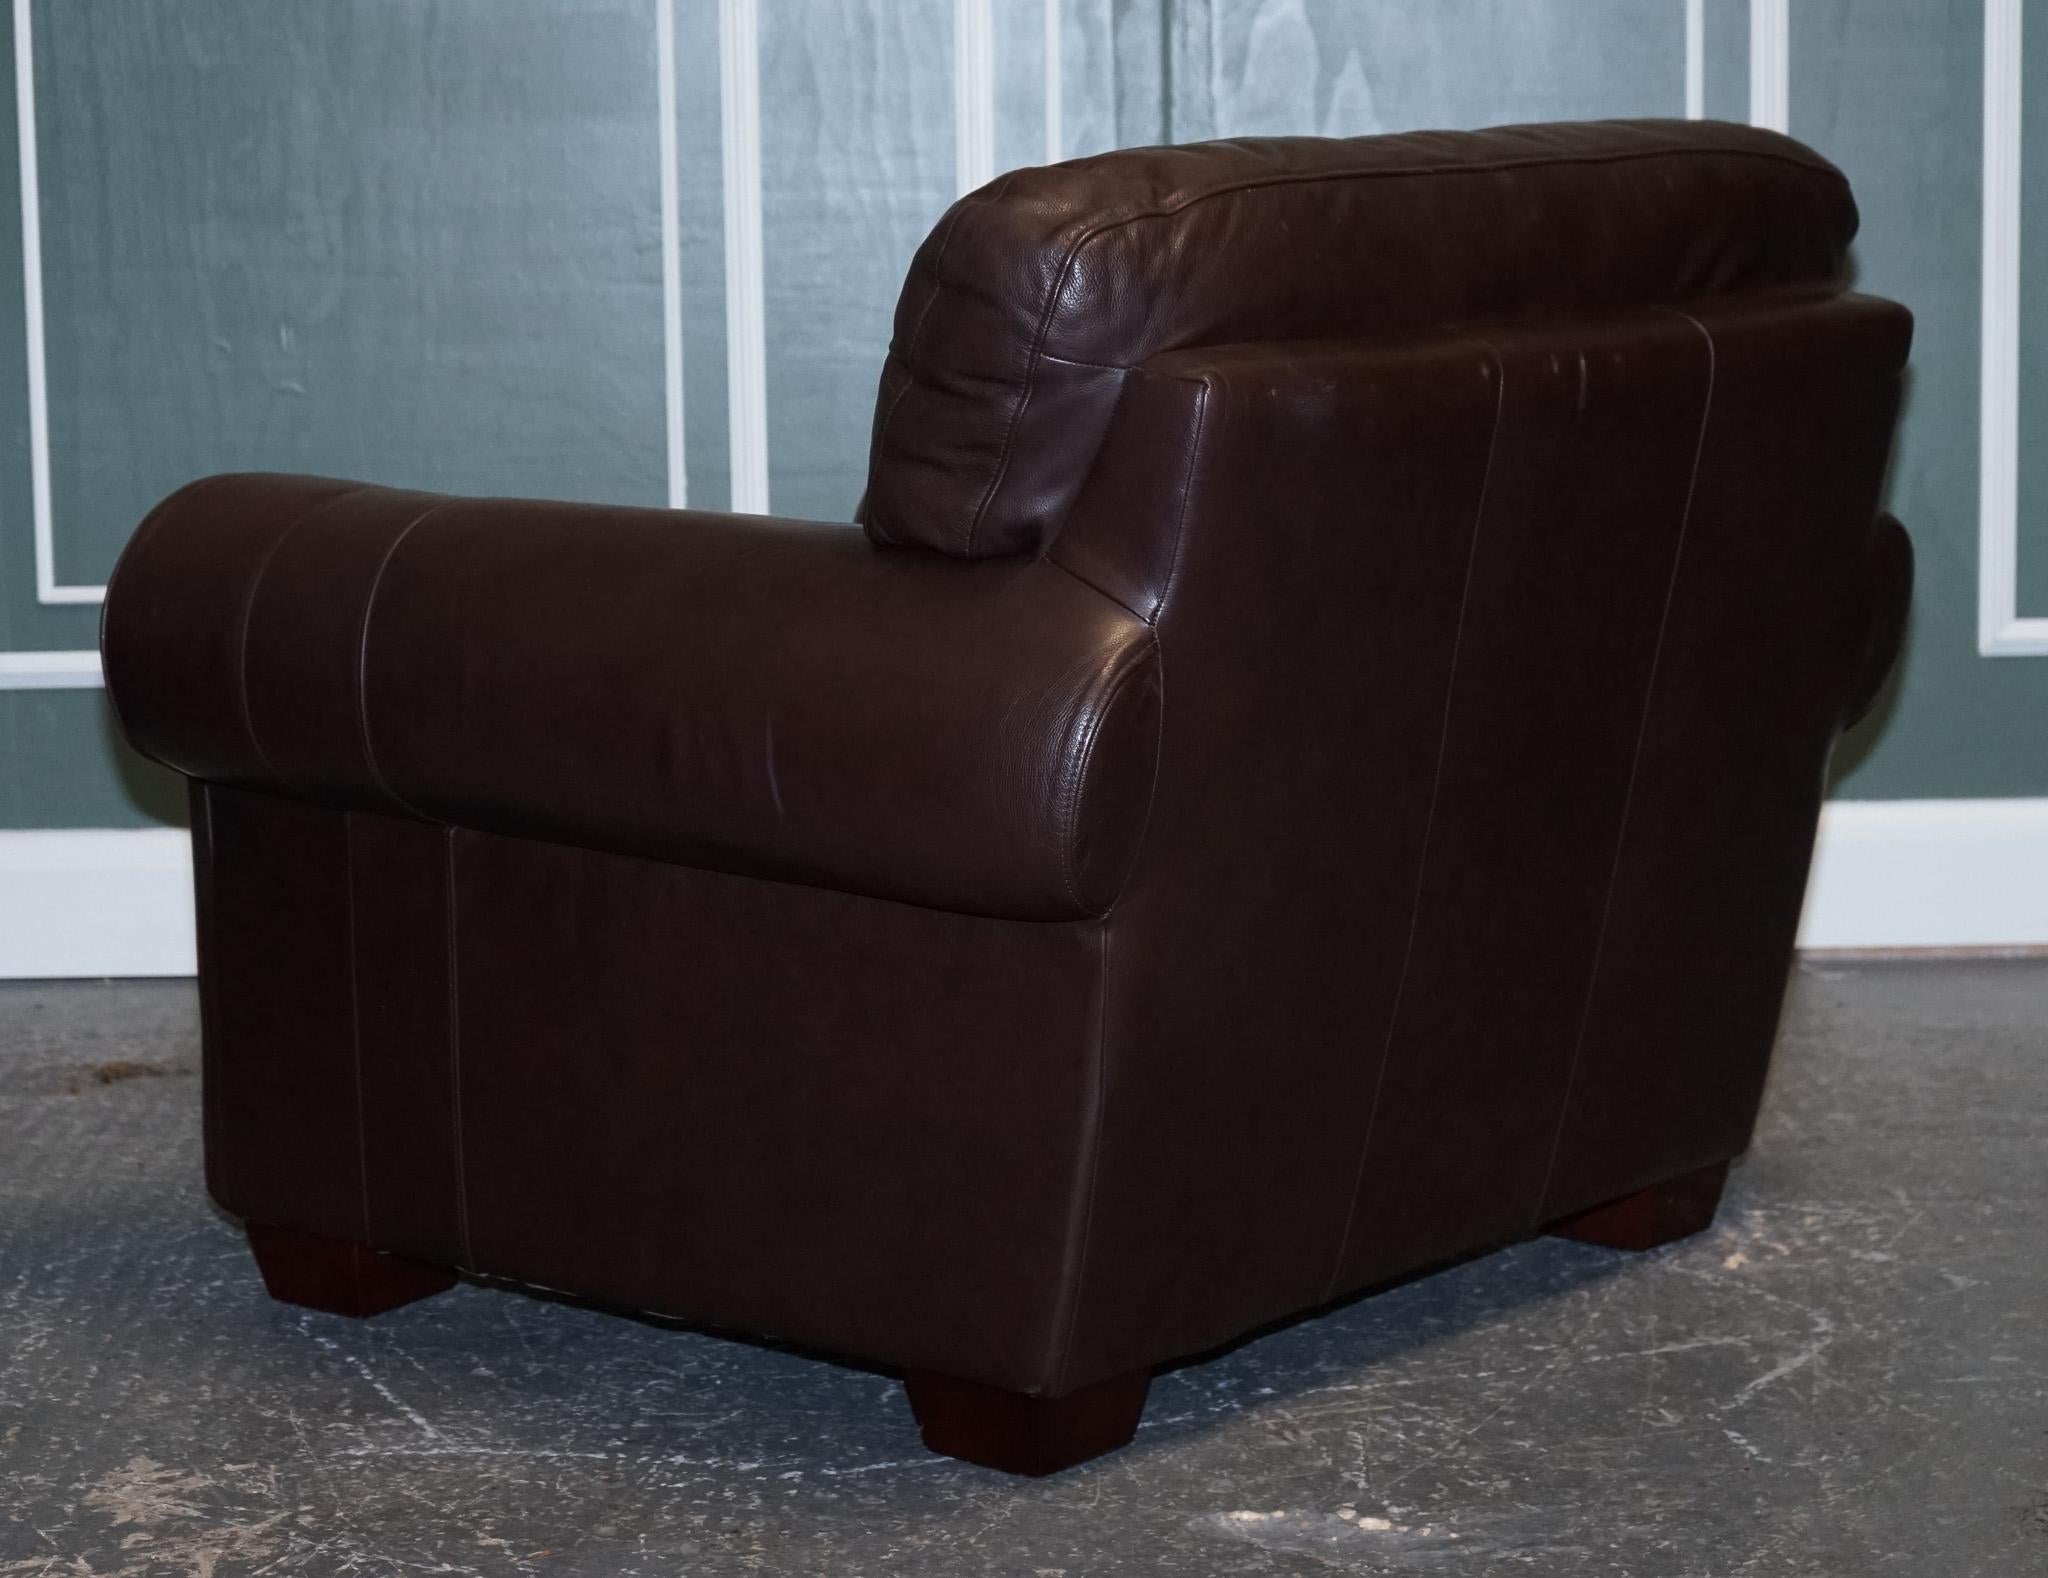 PAIR OF LARGE COMFORTABLE BROWN LEATHER ARMCHAIRS, MATCHiNG SOFA AVAILABLE For Sale 1